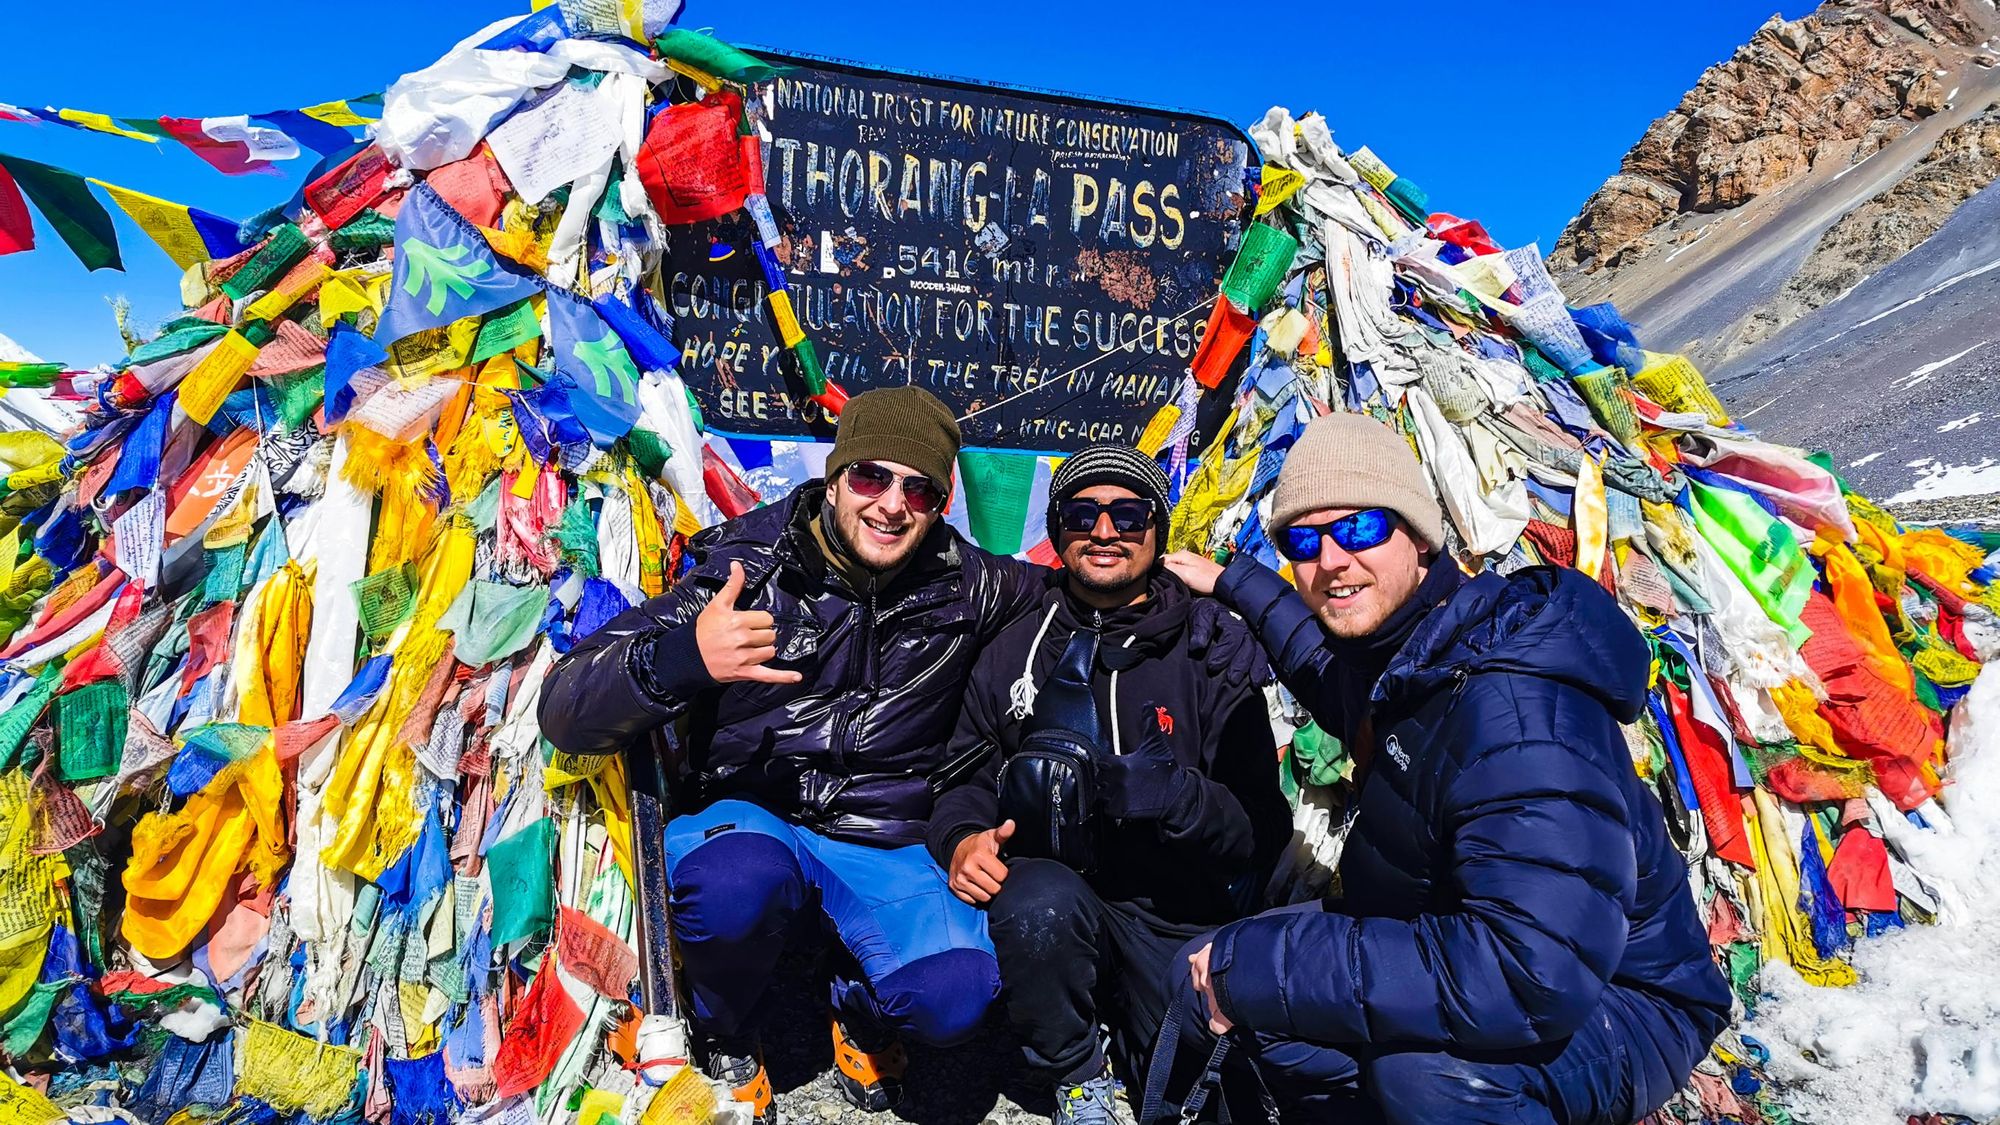 A celebratory photo at the high point of the Annapurna Circuit, at the Thorang-La Pass. Photo: Josh Edwards